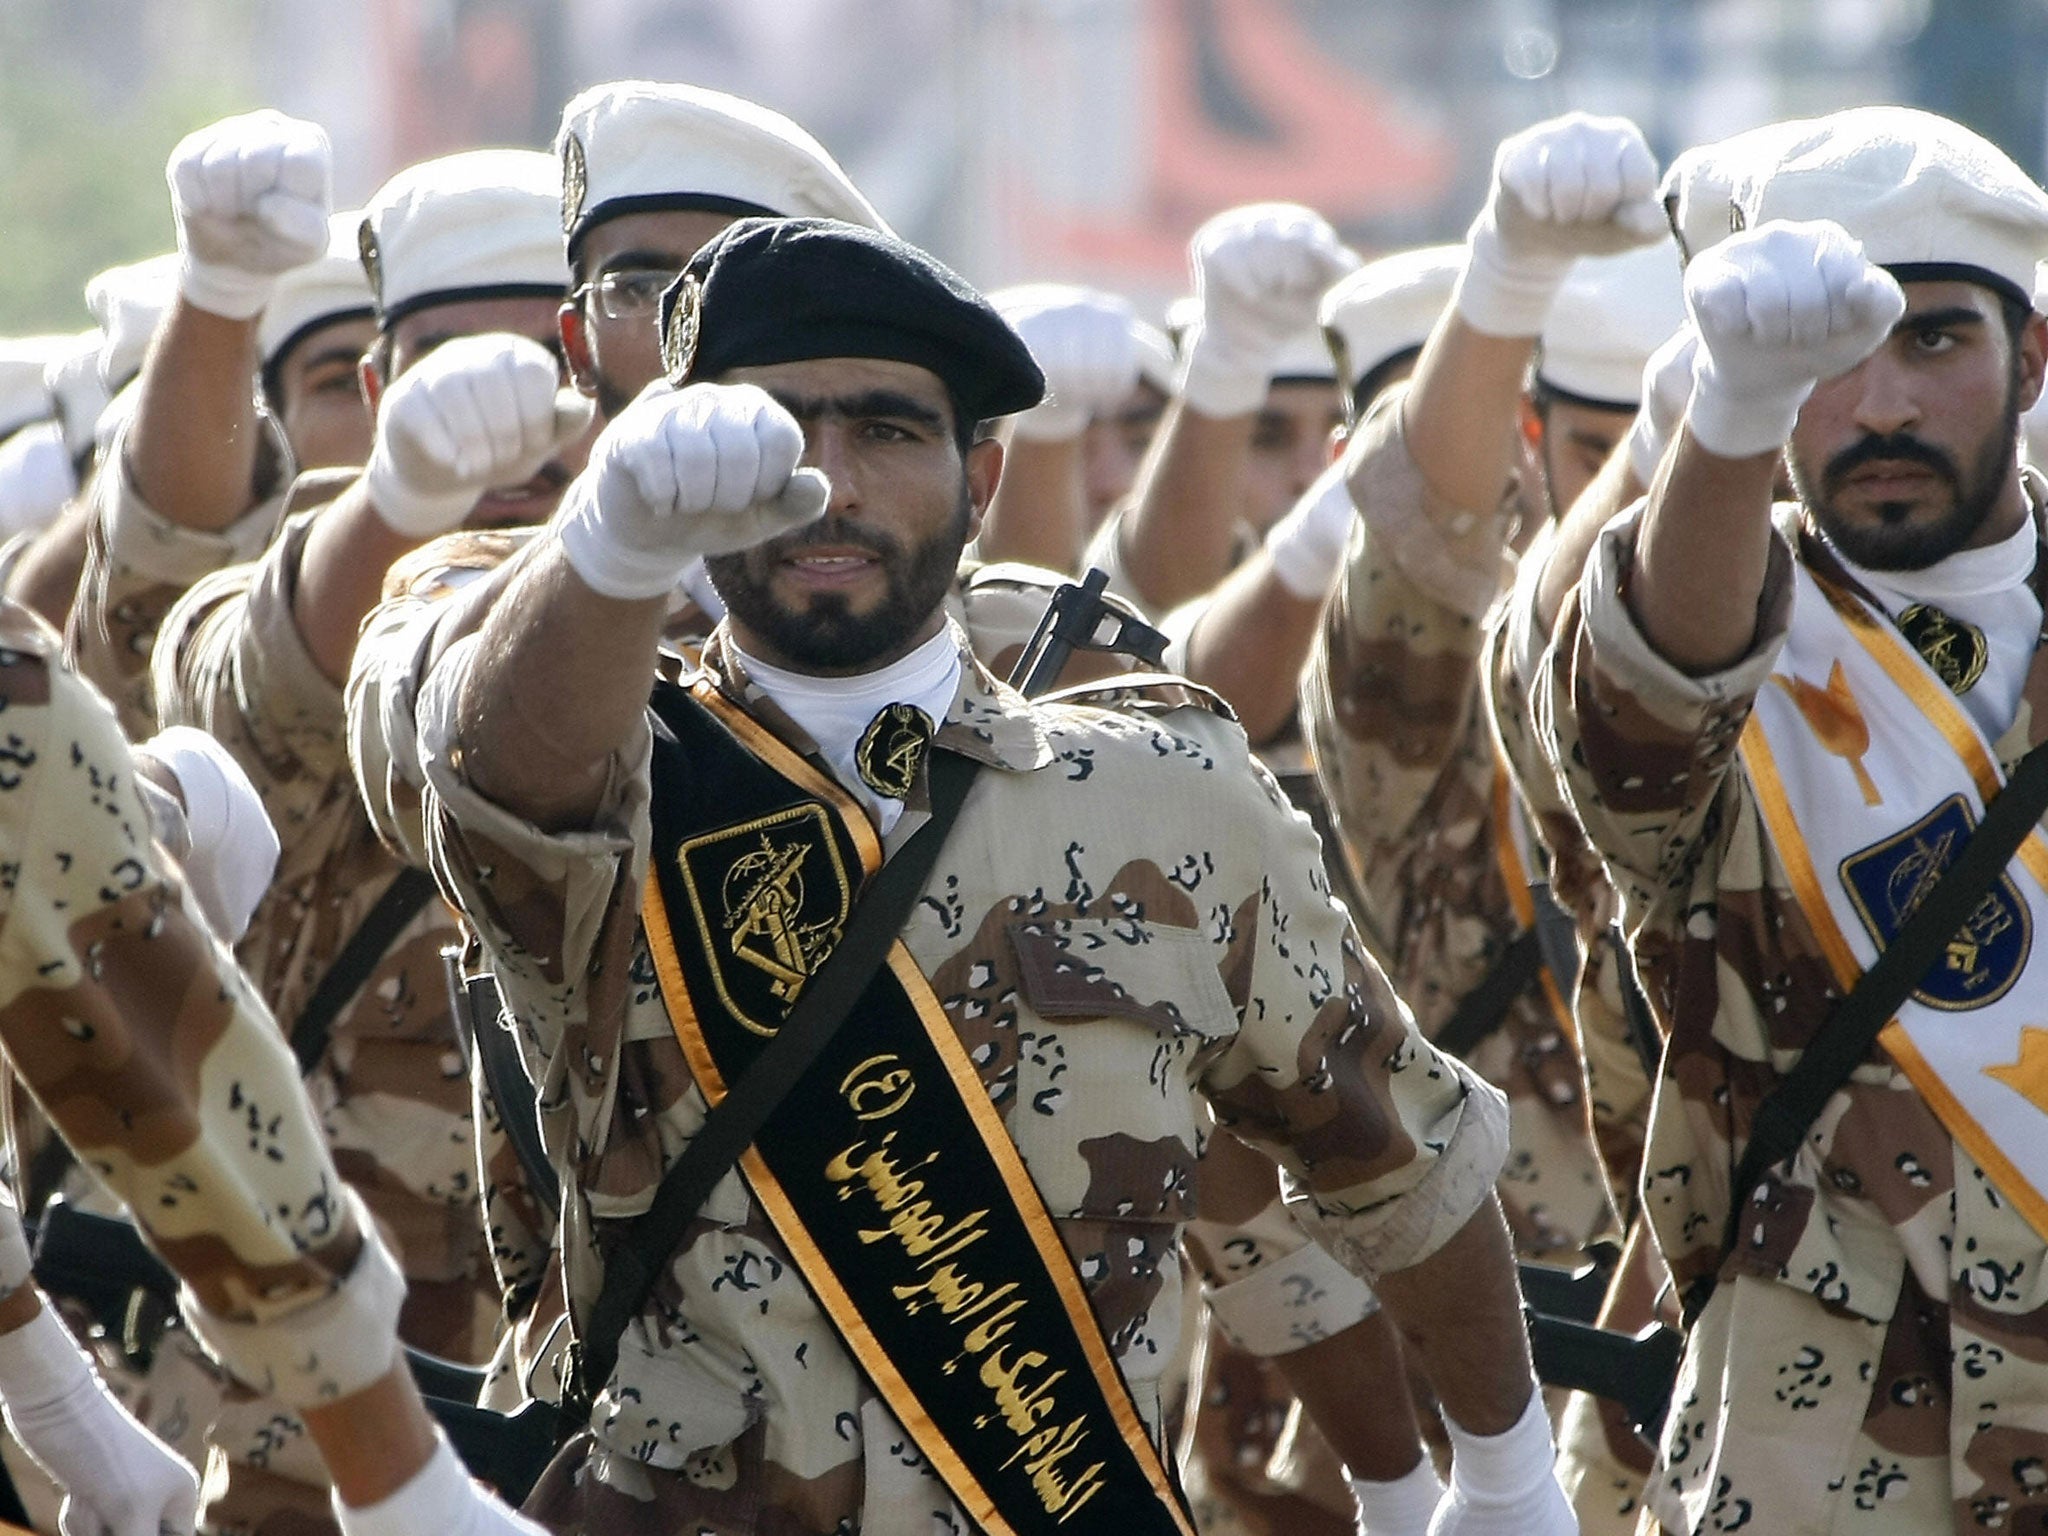 Iran's elite Revolutionary Guards claim to have shot down an Israeli drone